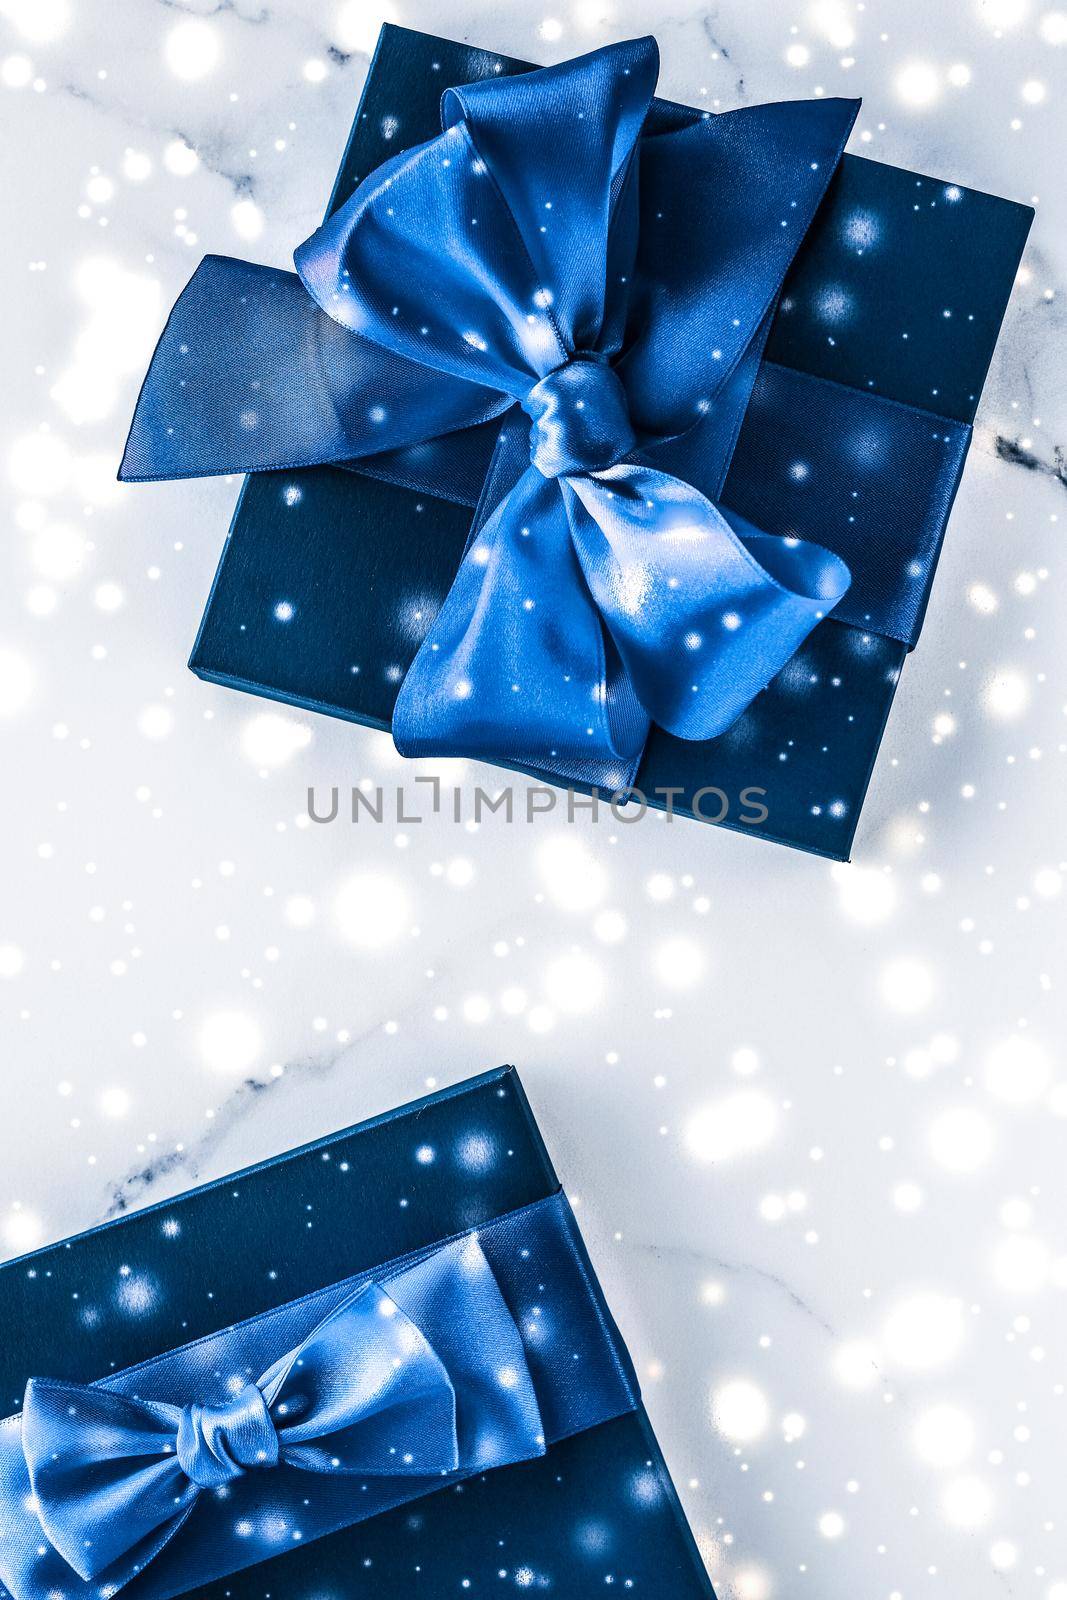 Branding, glamour and cold season concept - Winter holiday gift box with blue silk bow, snow glitter on marble background as Christmas and New Years presents for luxury beauty brand, flatlay design